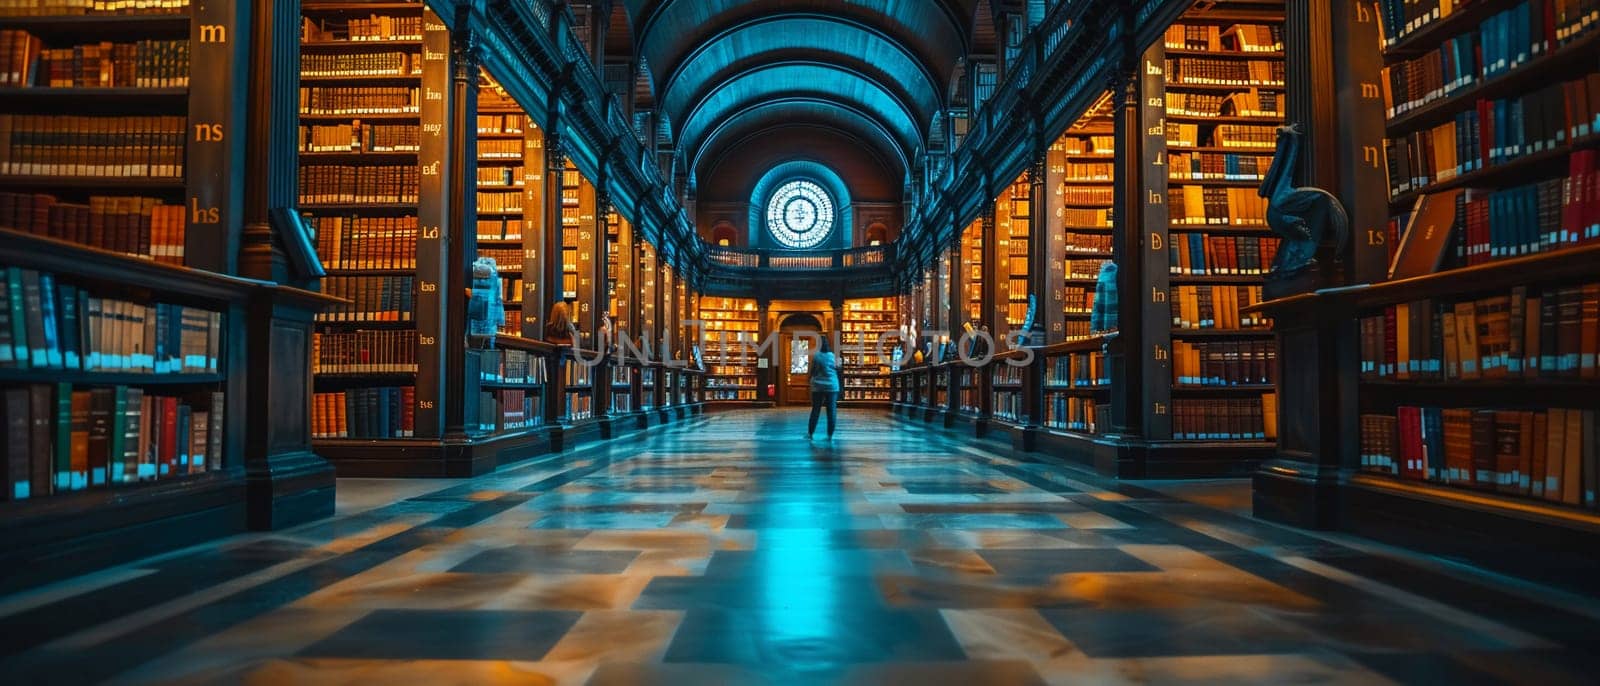 Historic Library with Students Lost in Study and Thought, A soft focus on readers among towering bookshelves conveys the pursuit of knowledge.